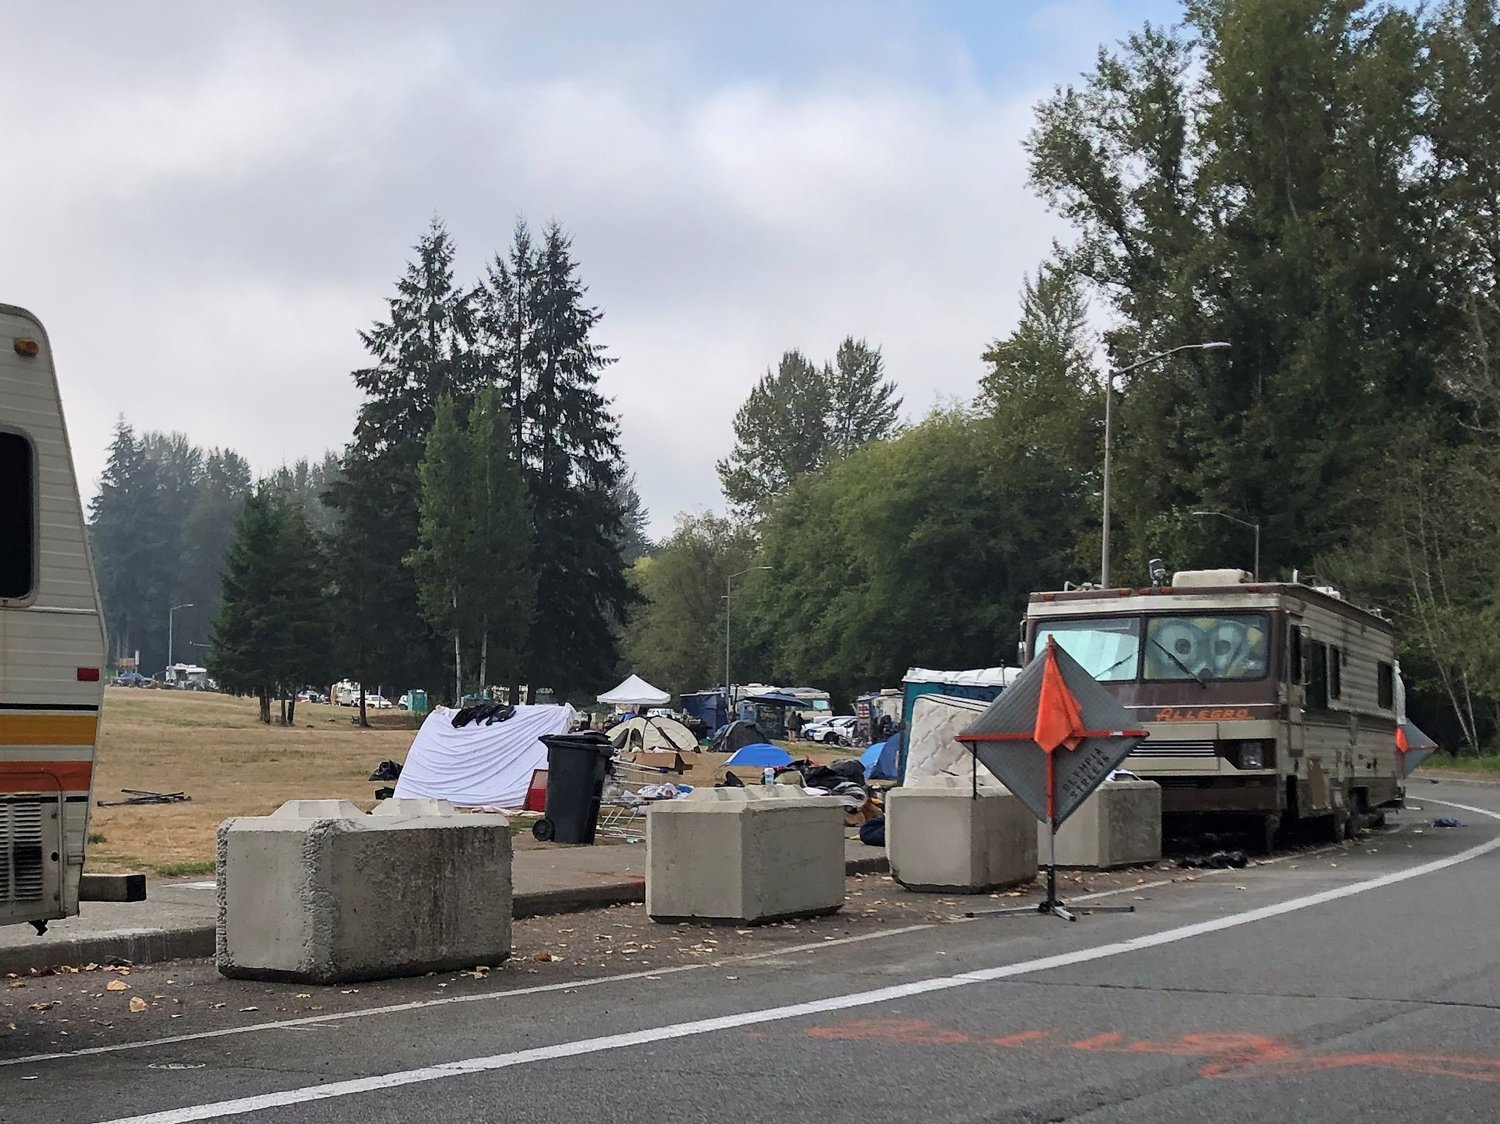 This was part of the Ensign Road Homeless Encampment on October 3, 2022, with tents and debris spread across sections of the field next to the road.